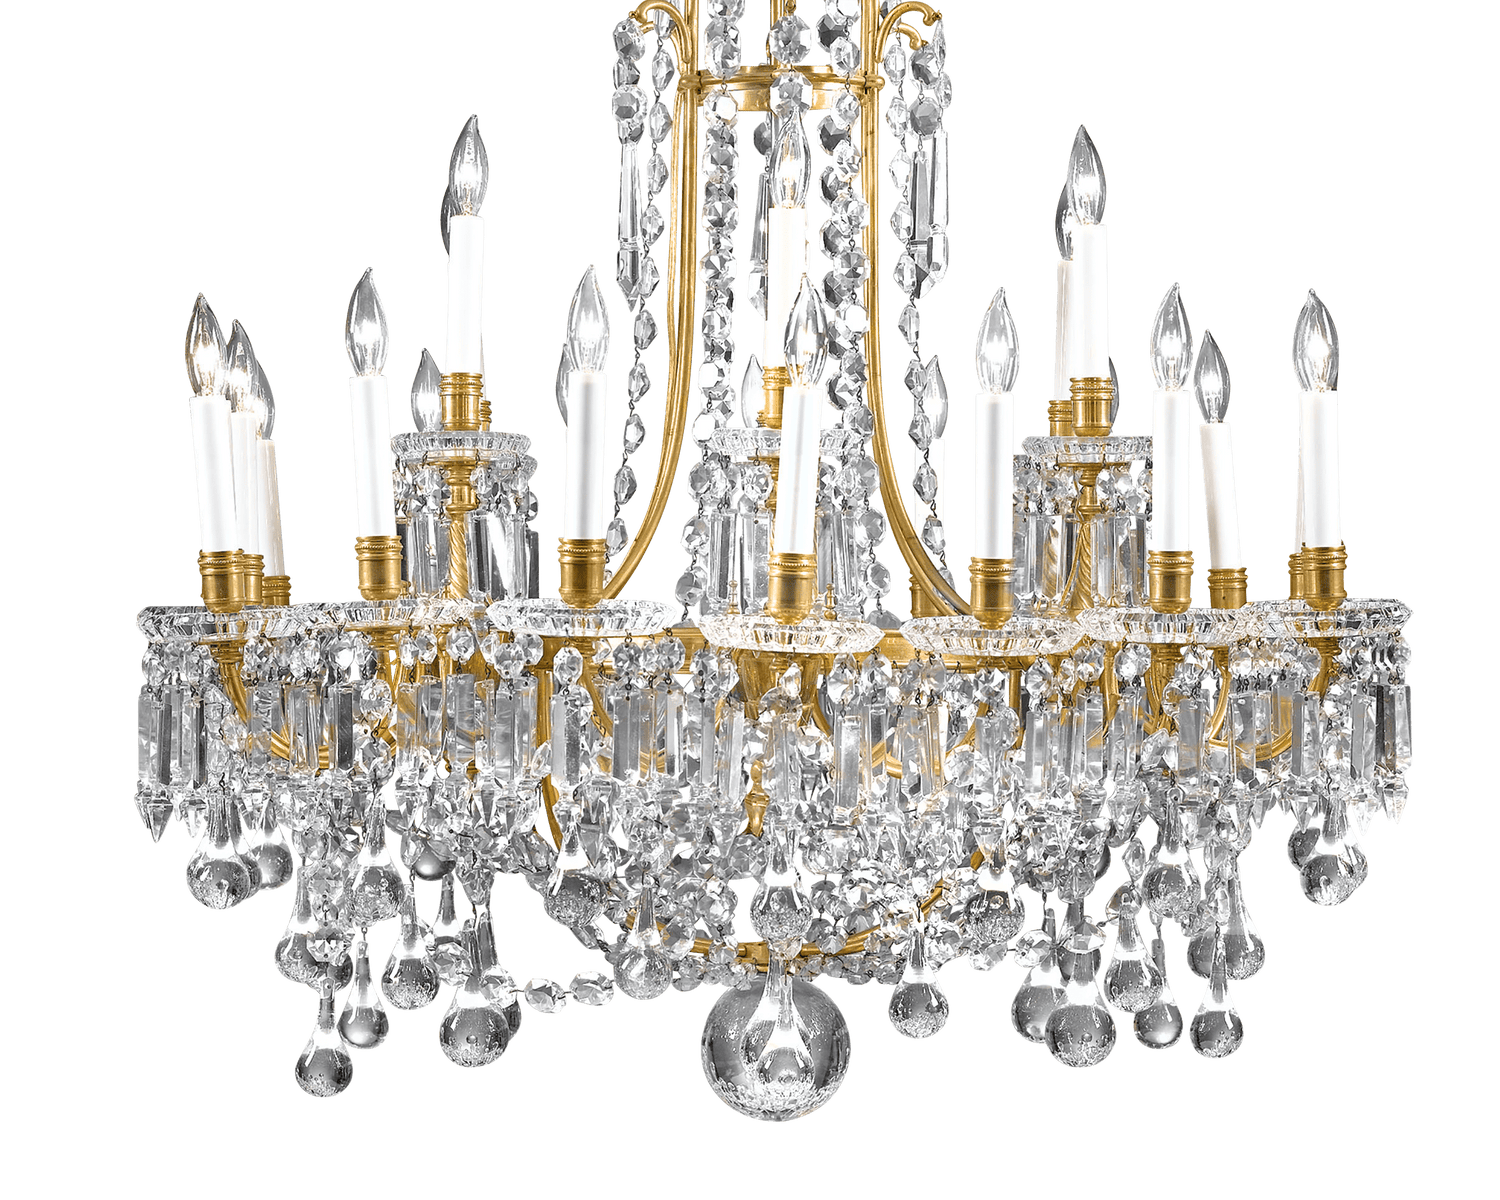 Baccarat is world-renowned for their crystal artistry, especially grand chandeliers such as this